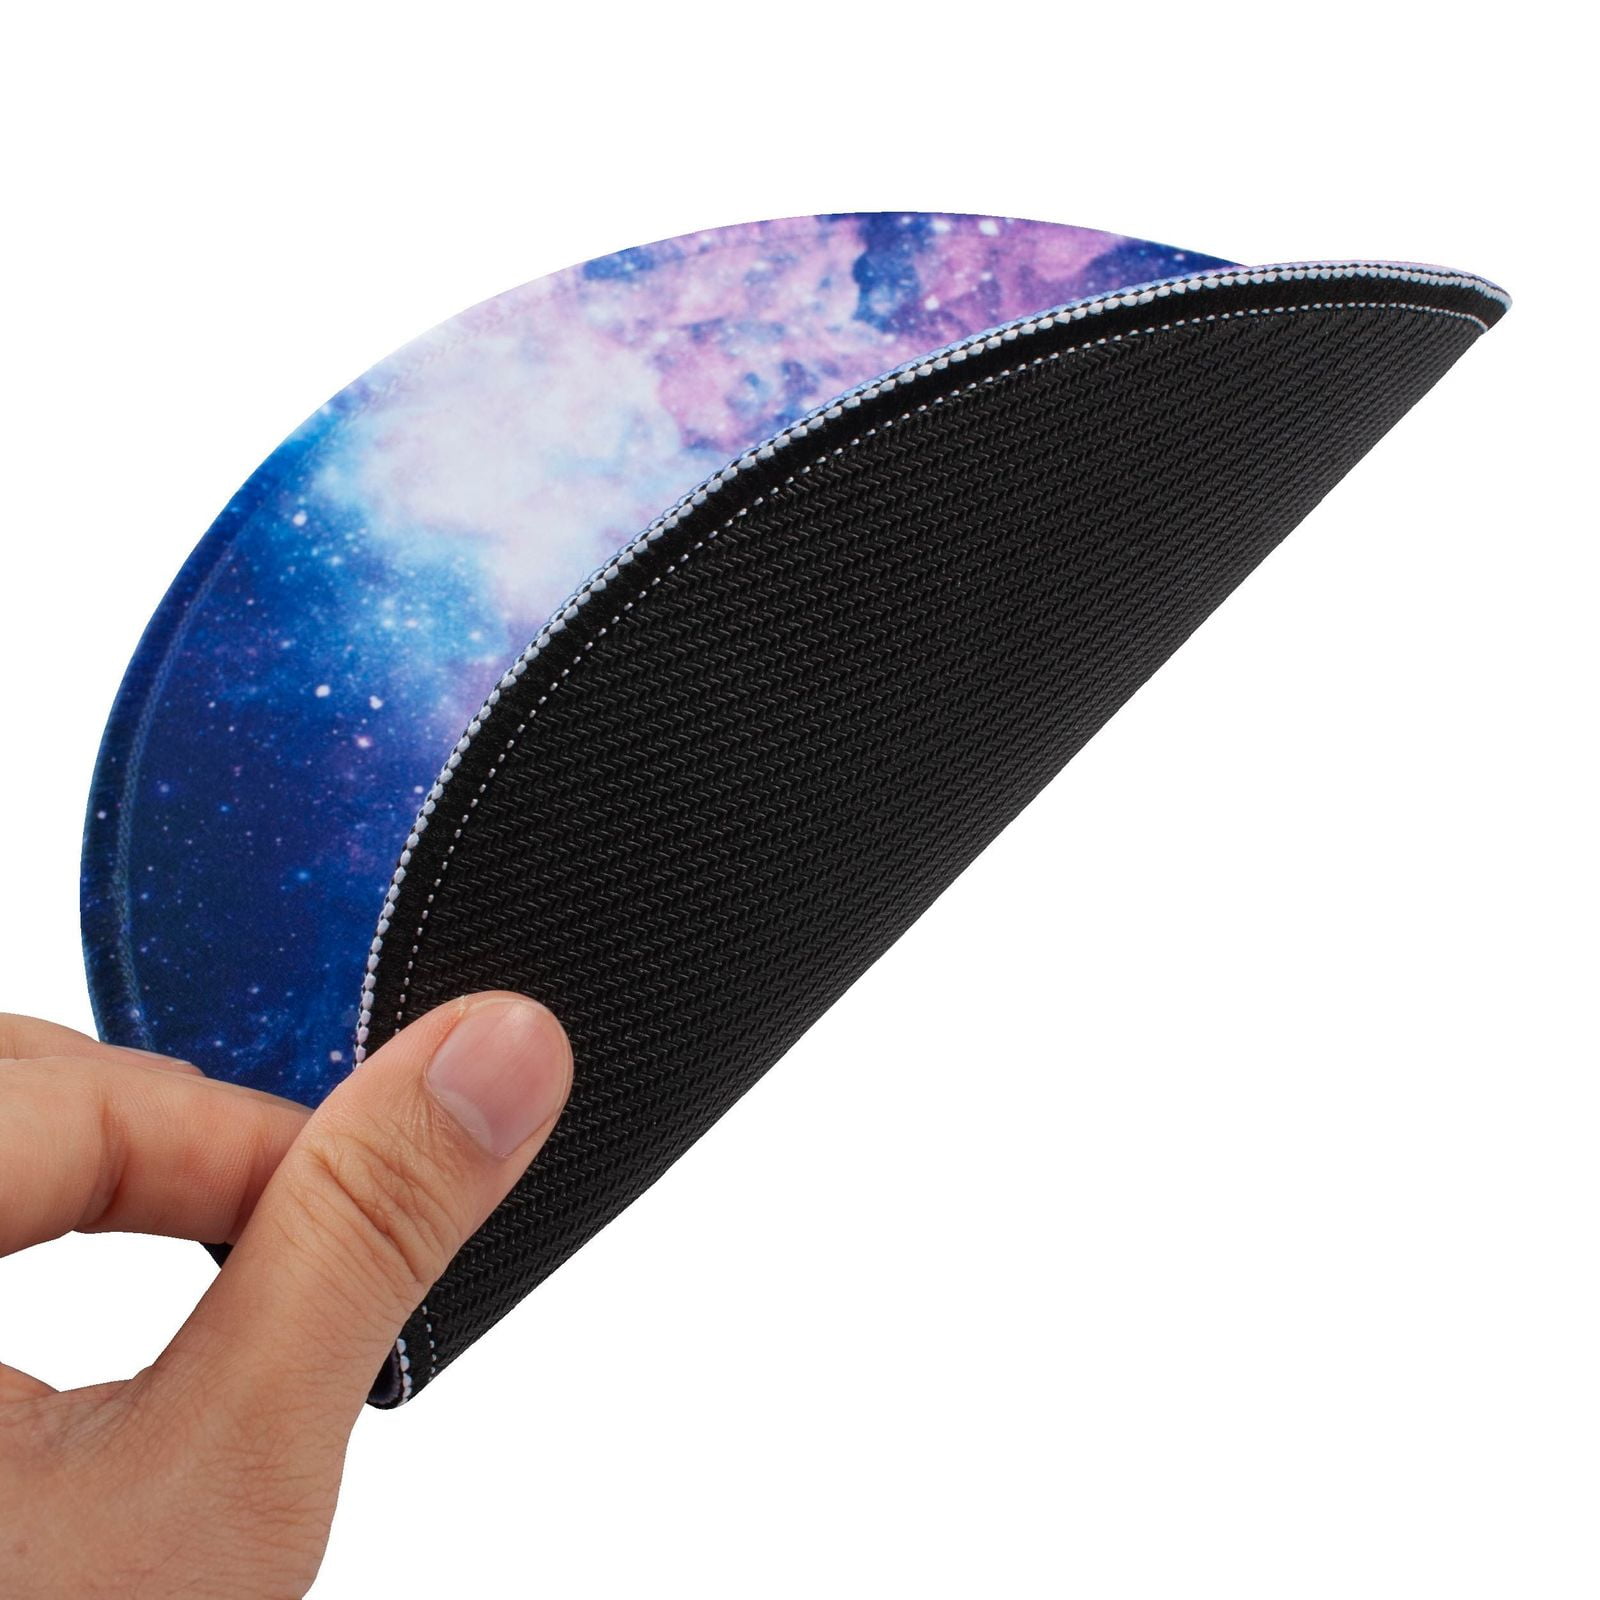 US$ 8.99 - Galaxy Tools Gear Type Rubber Mat Pad for Model Hobby